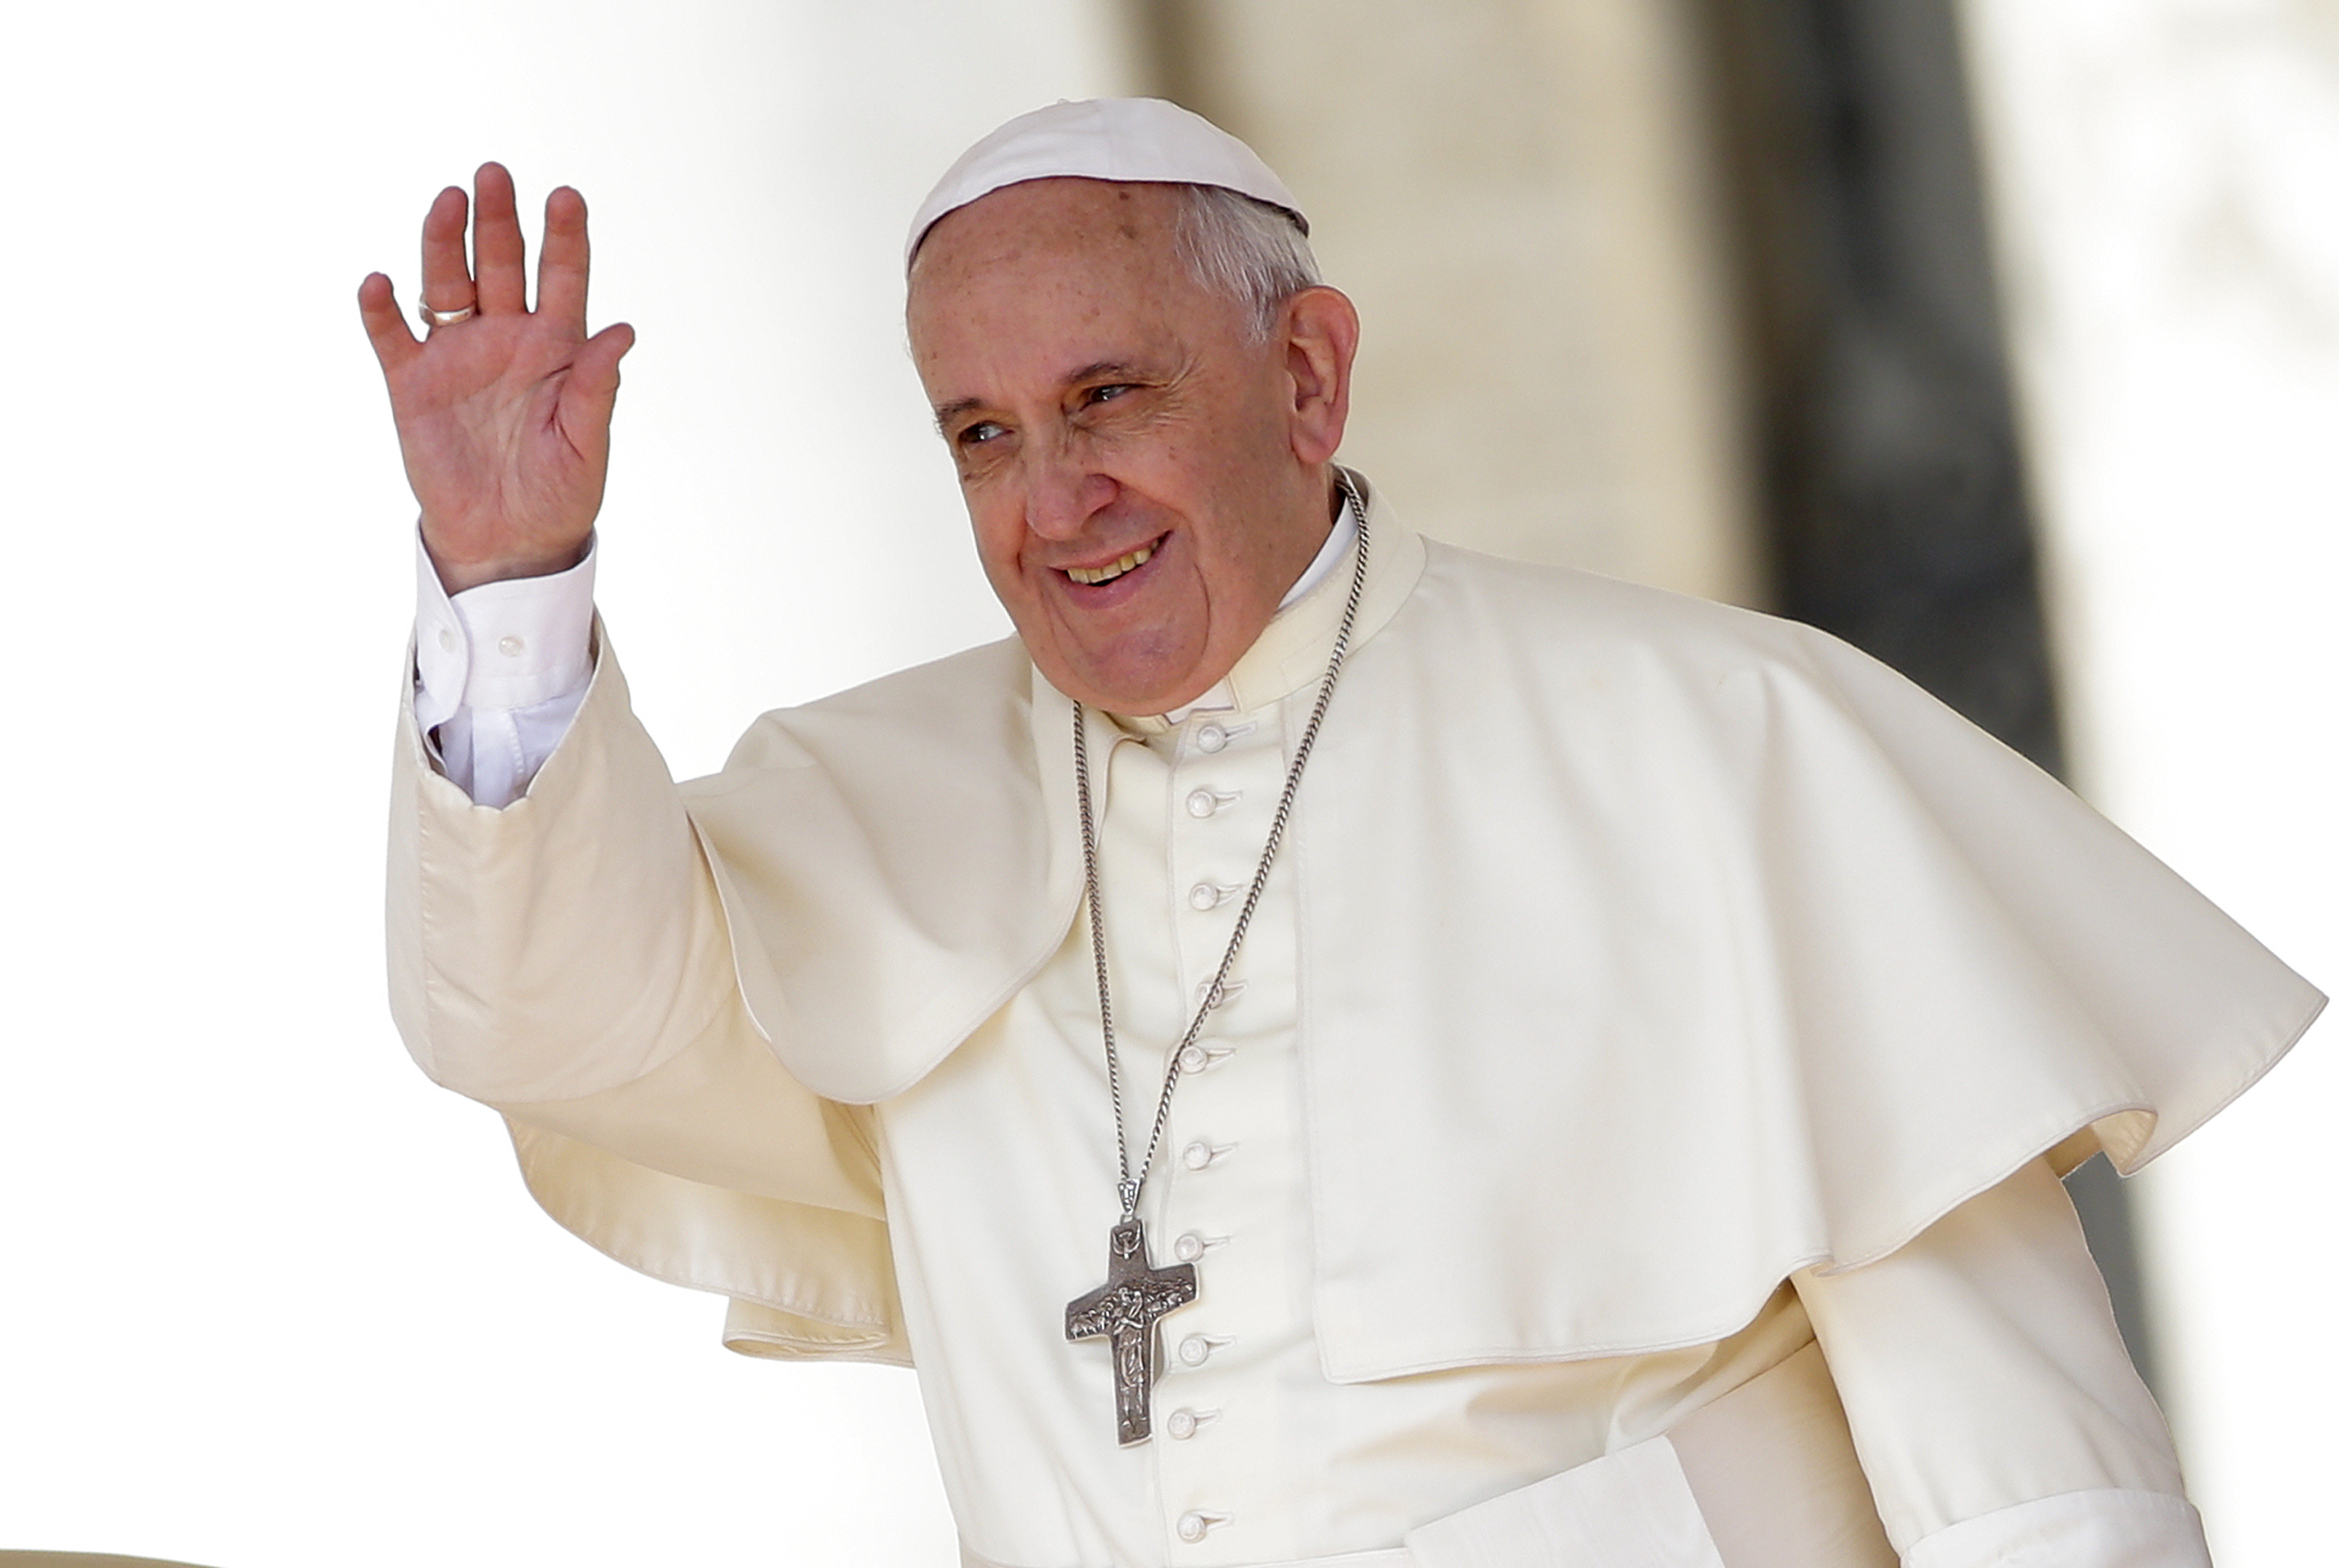 http://www.independent.co.uk/incoming/article9736147.ece/binary/original/PopeFrancisIsis-v2.jpg